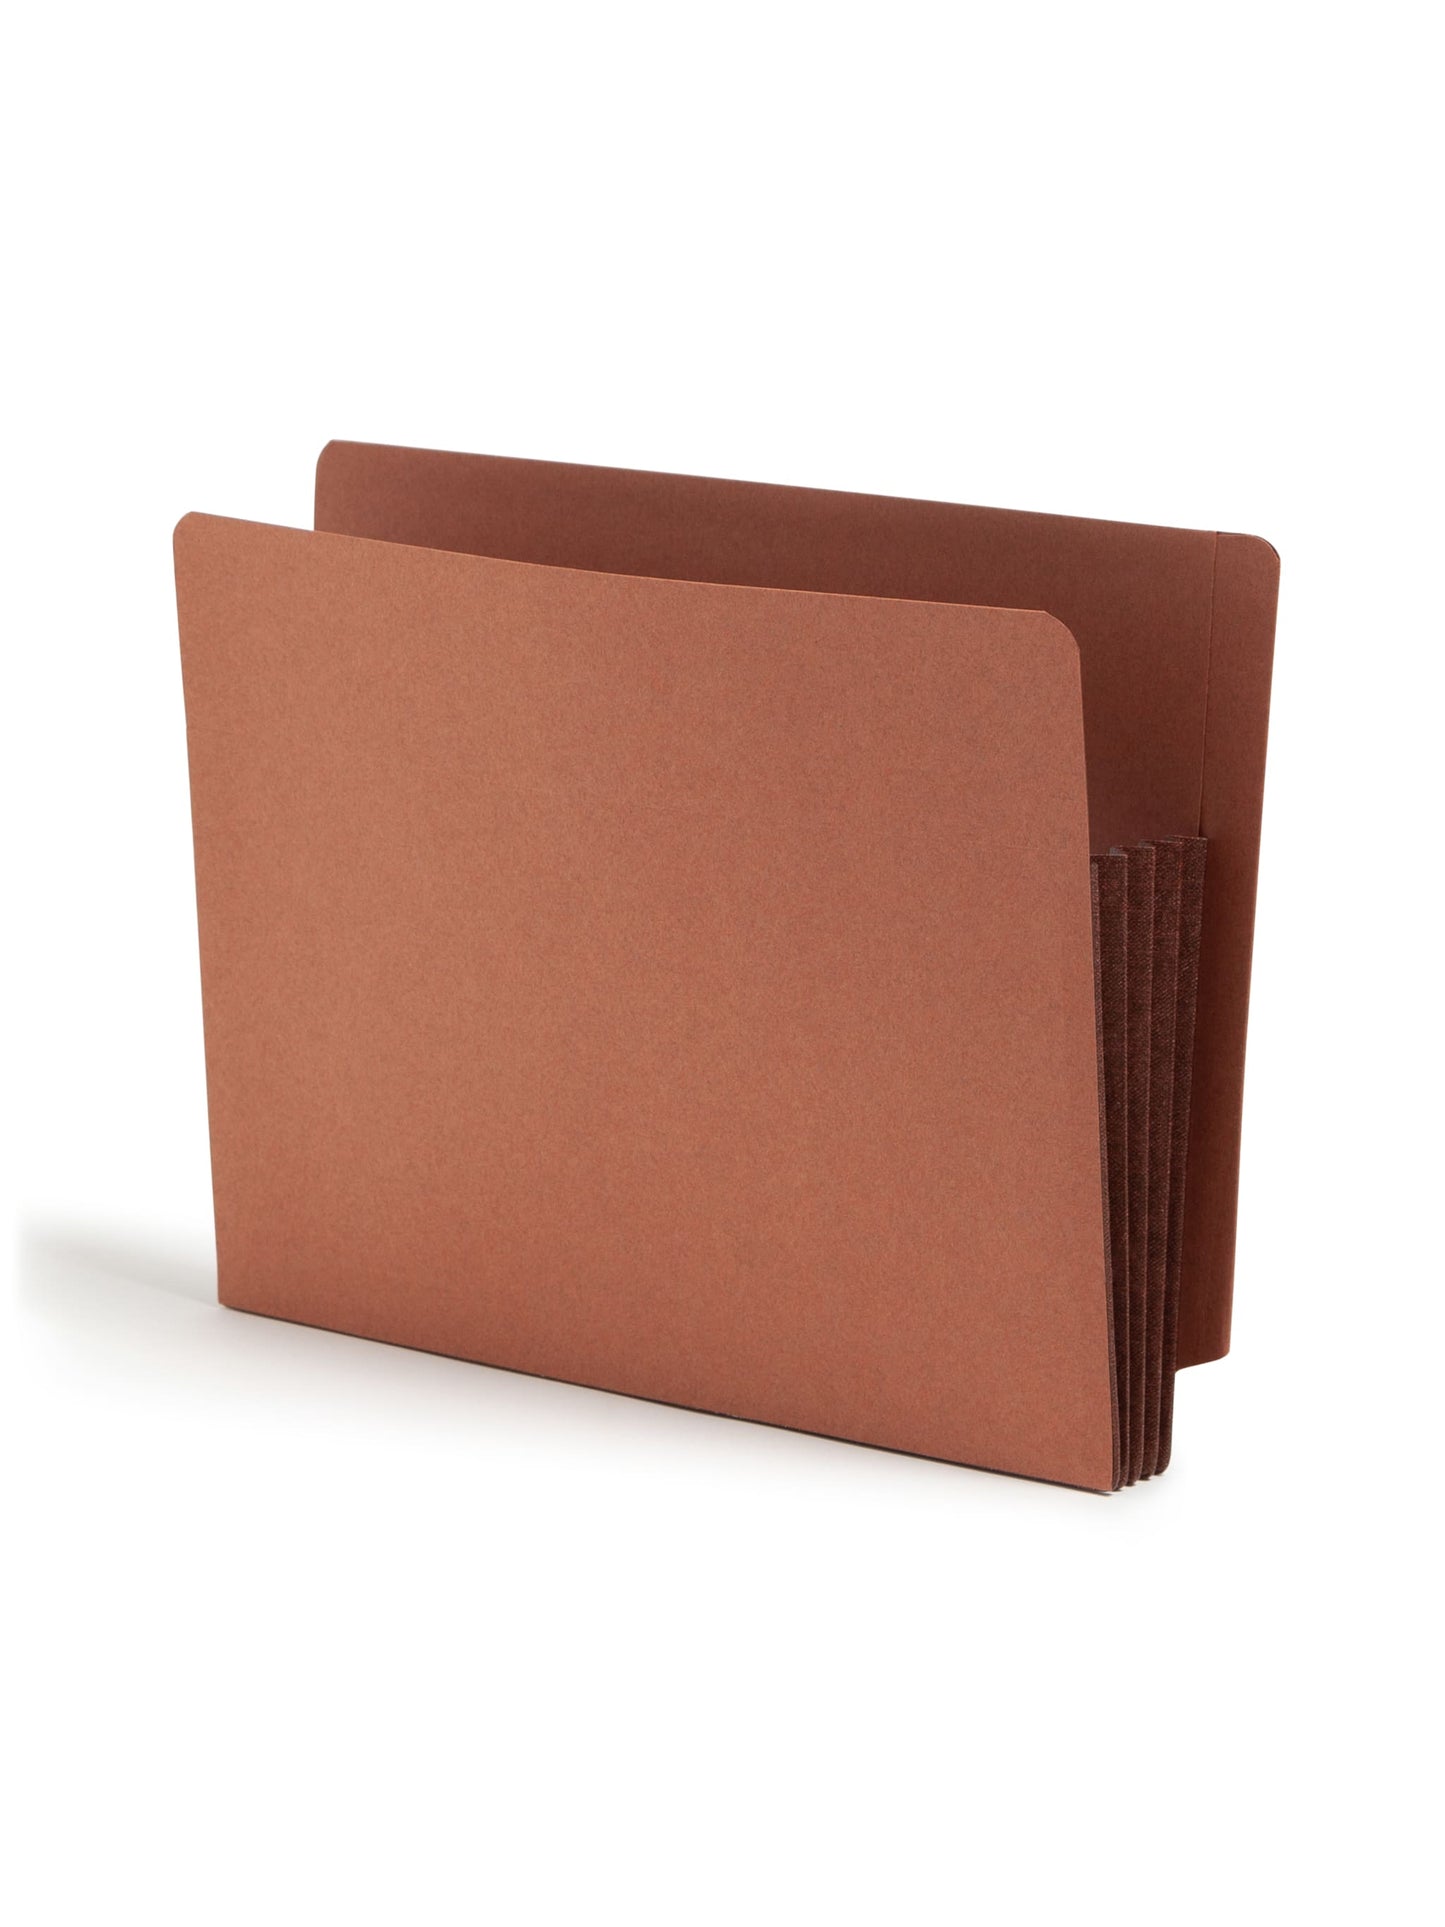 Reinforced End Tab File Pockets, Straight-Cut Tab, 3-1/2 inch Expansion, Dark Brown Color, Extra Wide Letter Size, Set of 0, 30086486736818